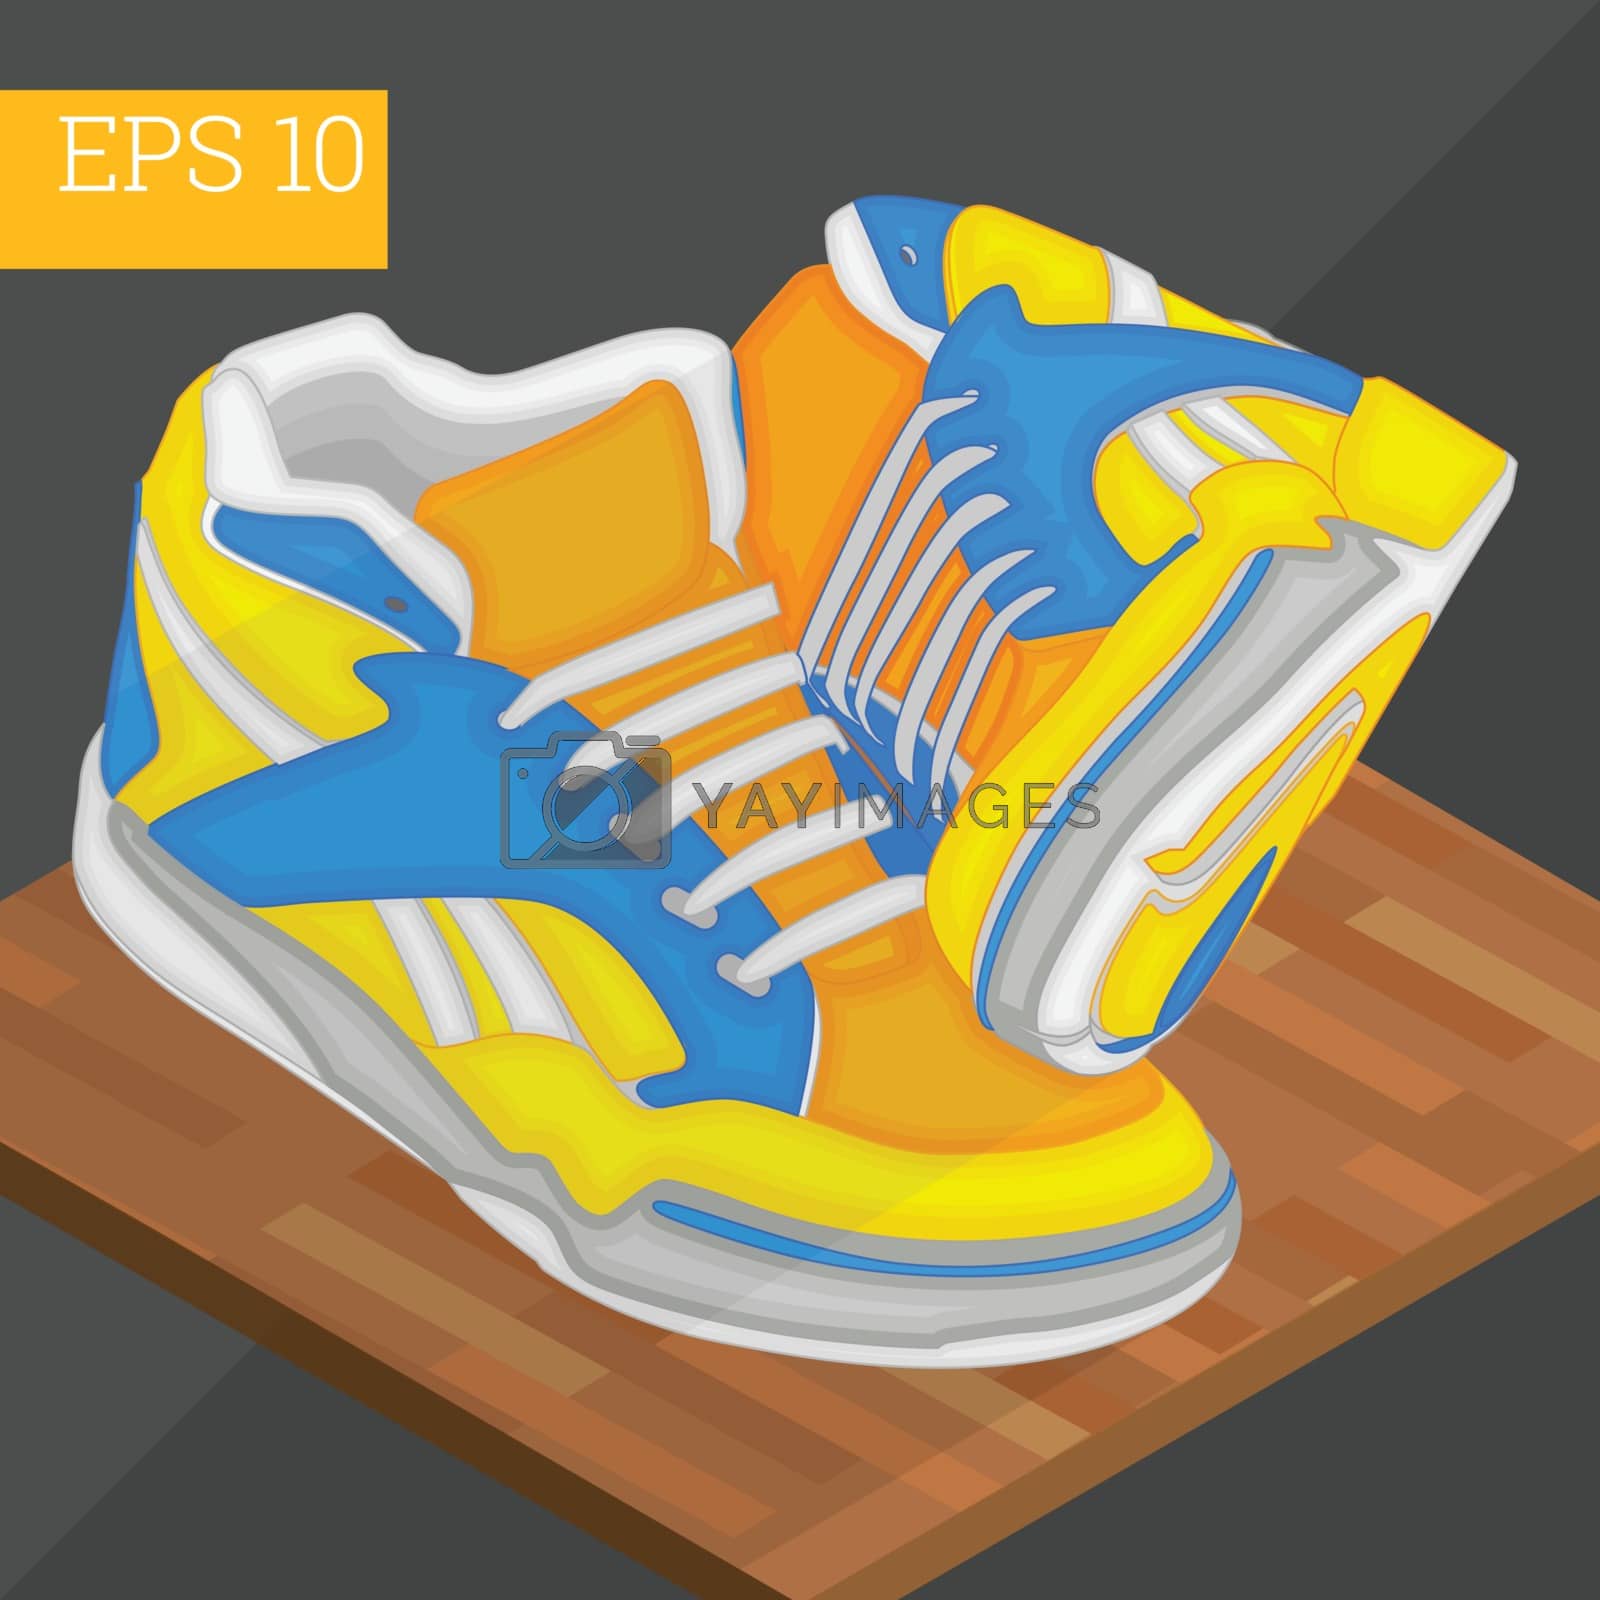 Royalty free image of sneakers shoes isometric vector illustration by xtate